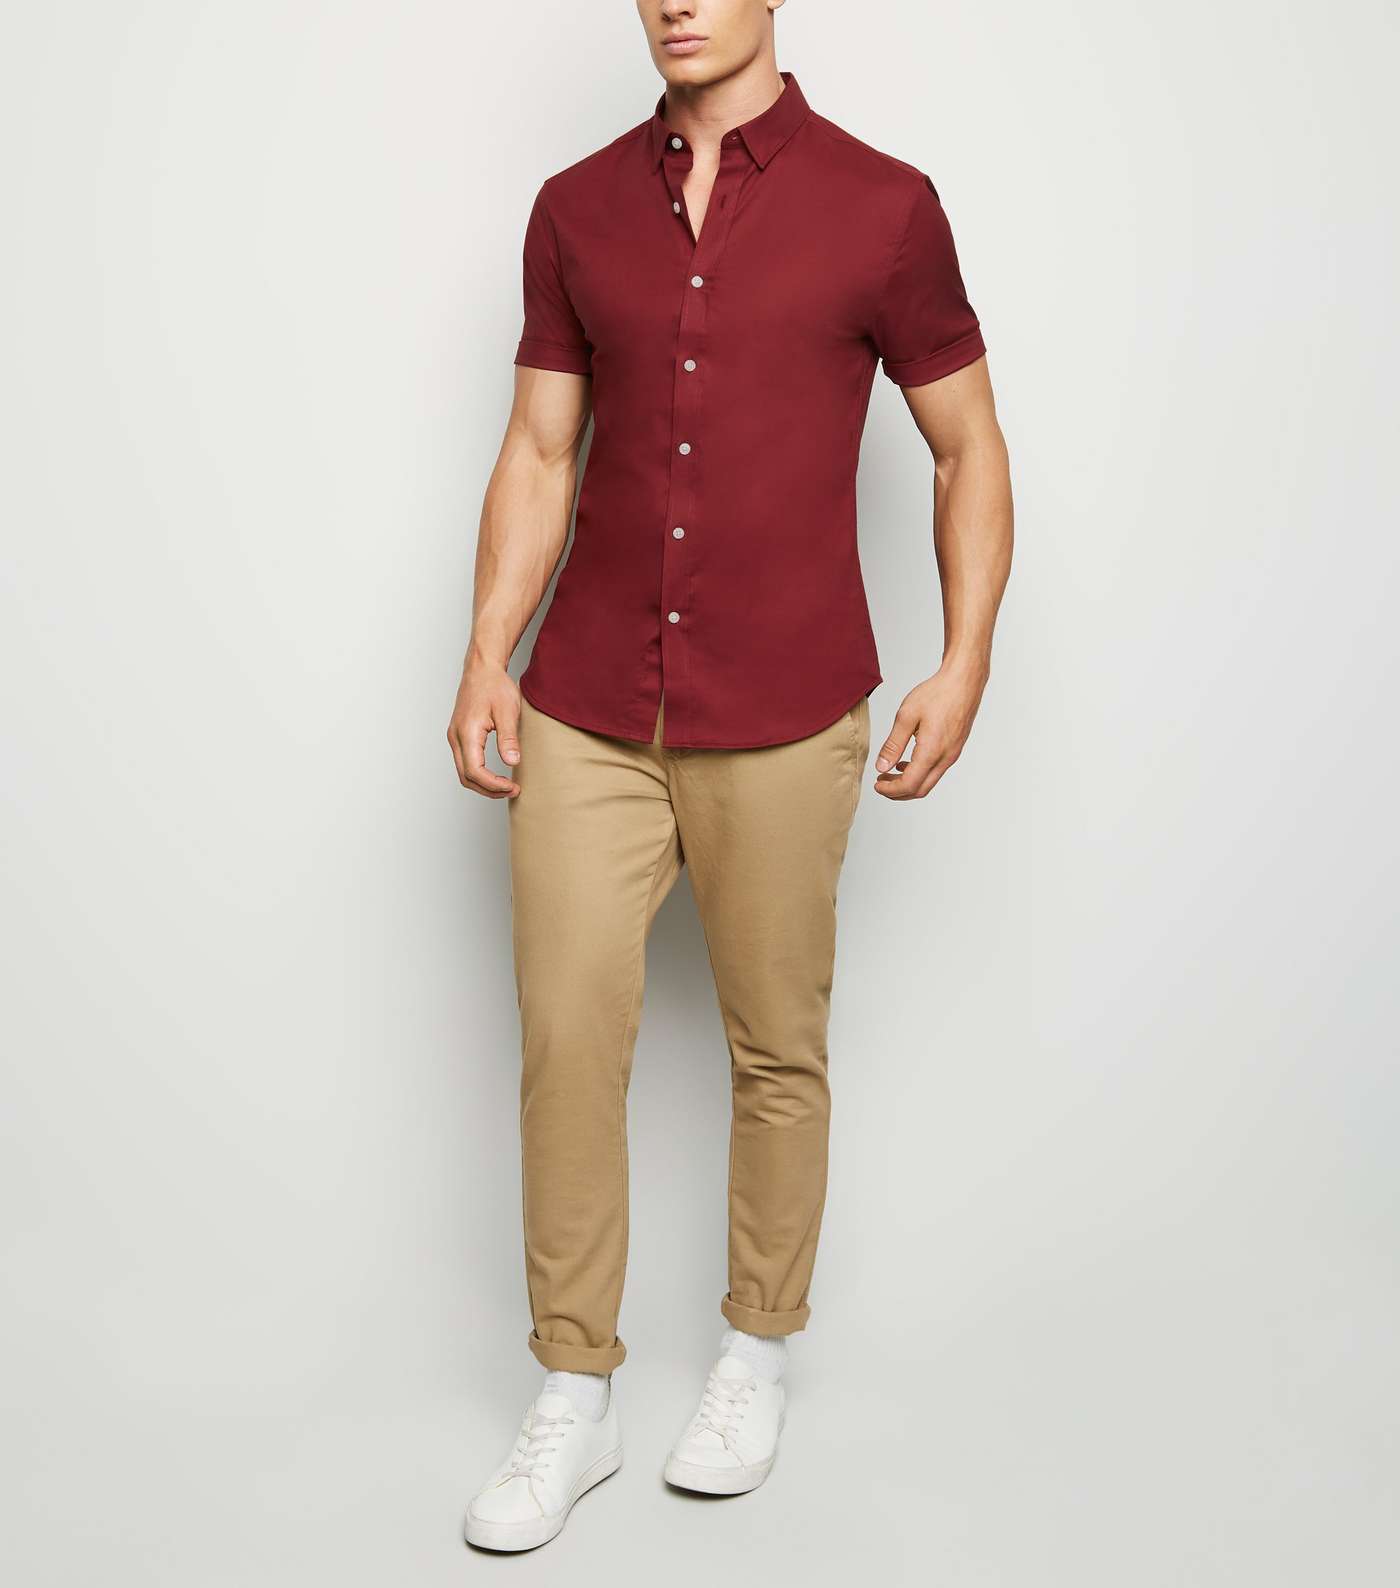 Burgundy Short Sleeve Muscle Fit Oxford Shirt Image 2